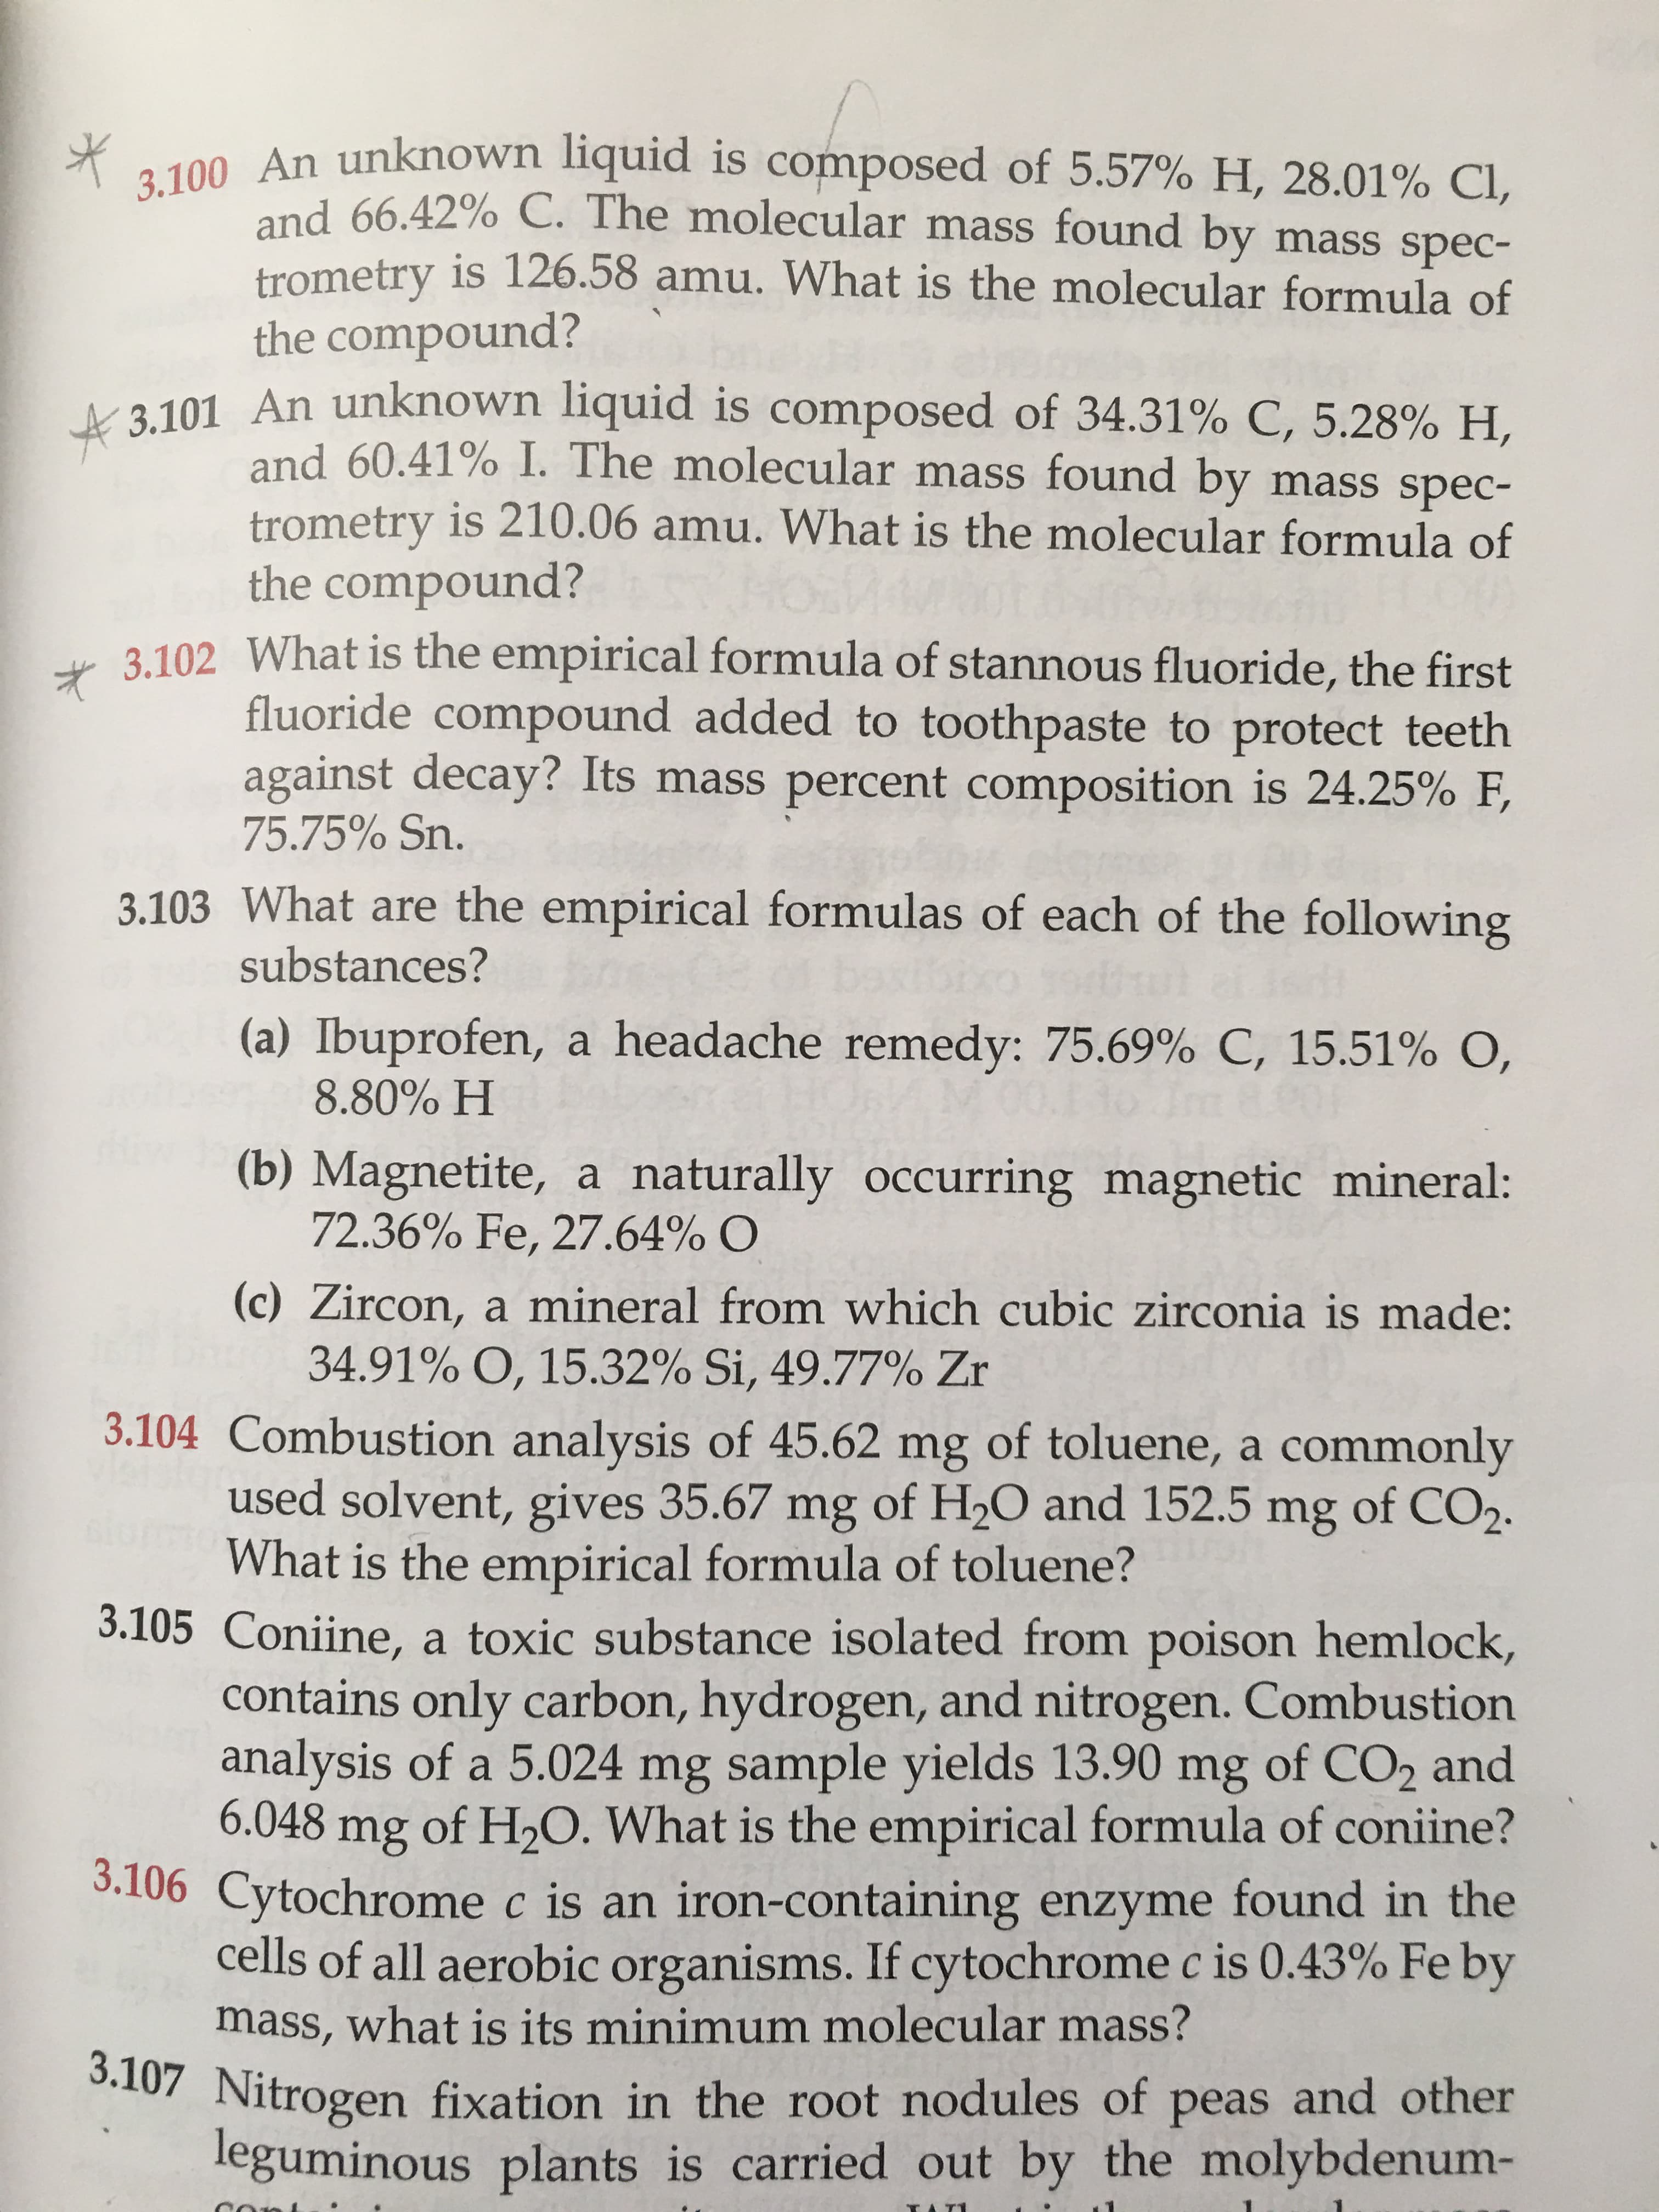 00. An unknown liquid is composed of 5.57% H, 28.01% CI,
and 66.42% C. The molecular mass found by mass spec-
trometry is 126.58 amu. What is the molecular formula of
the compound?
